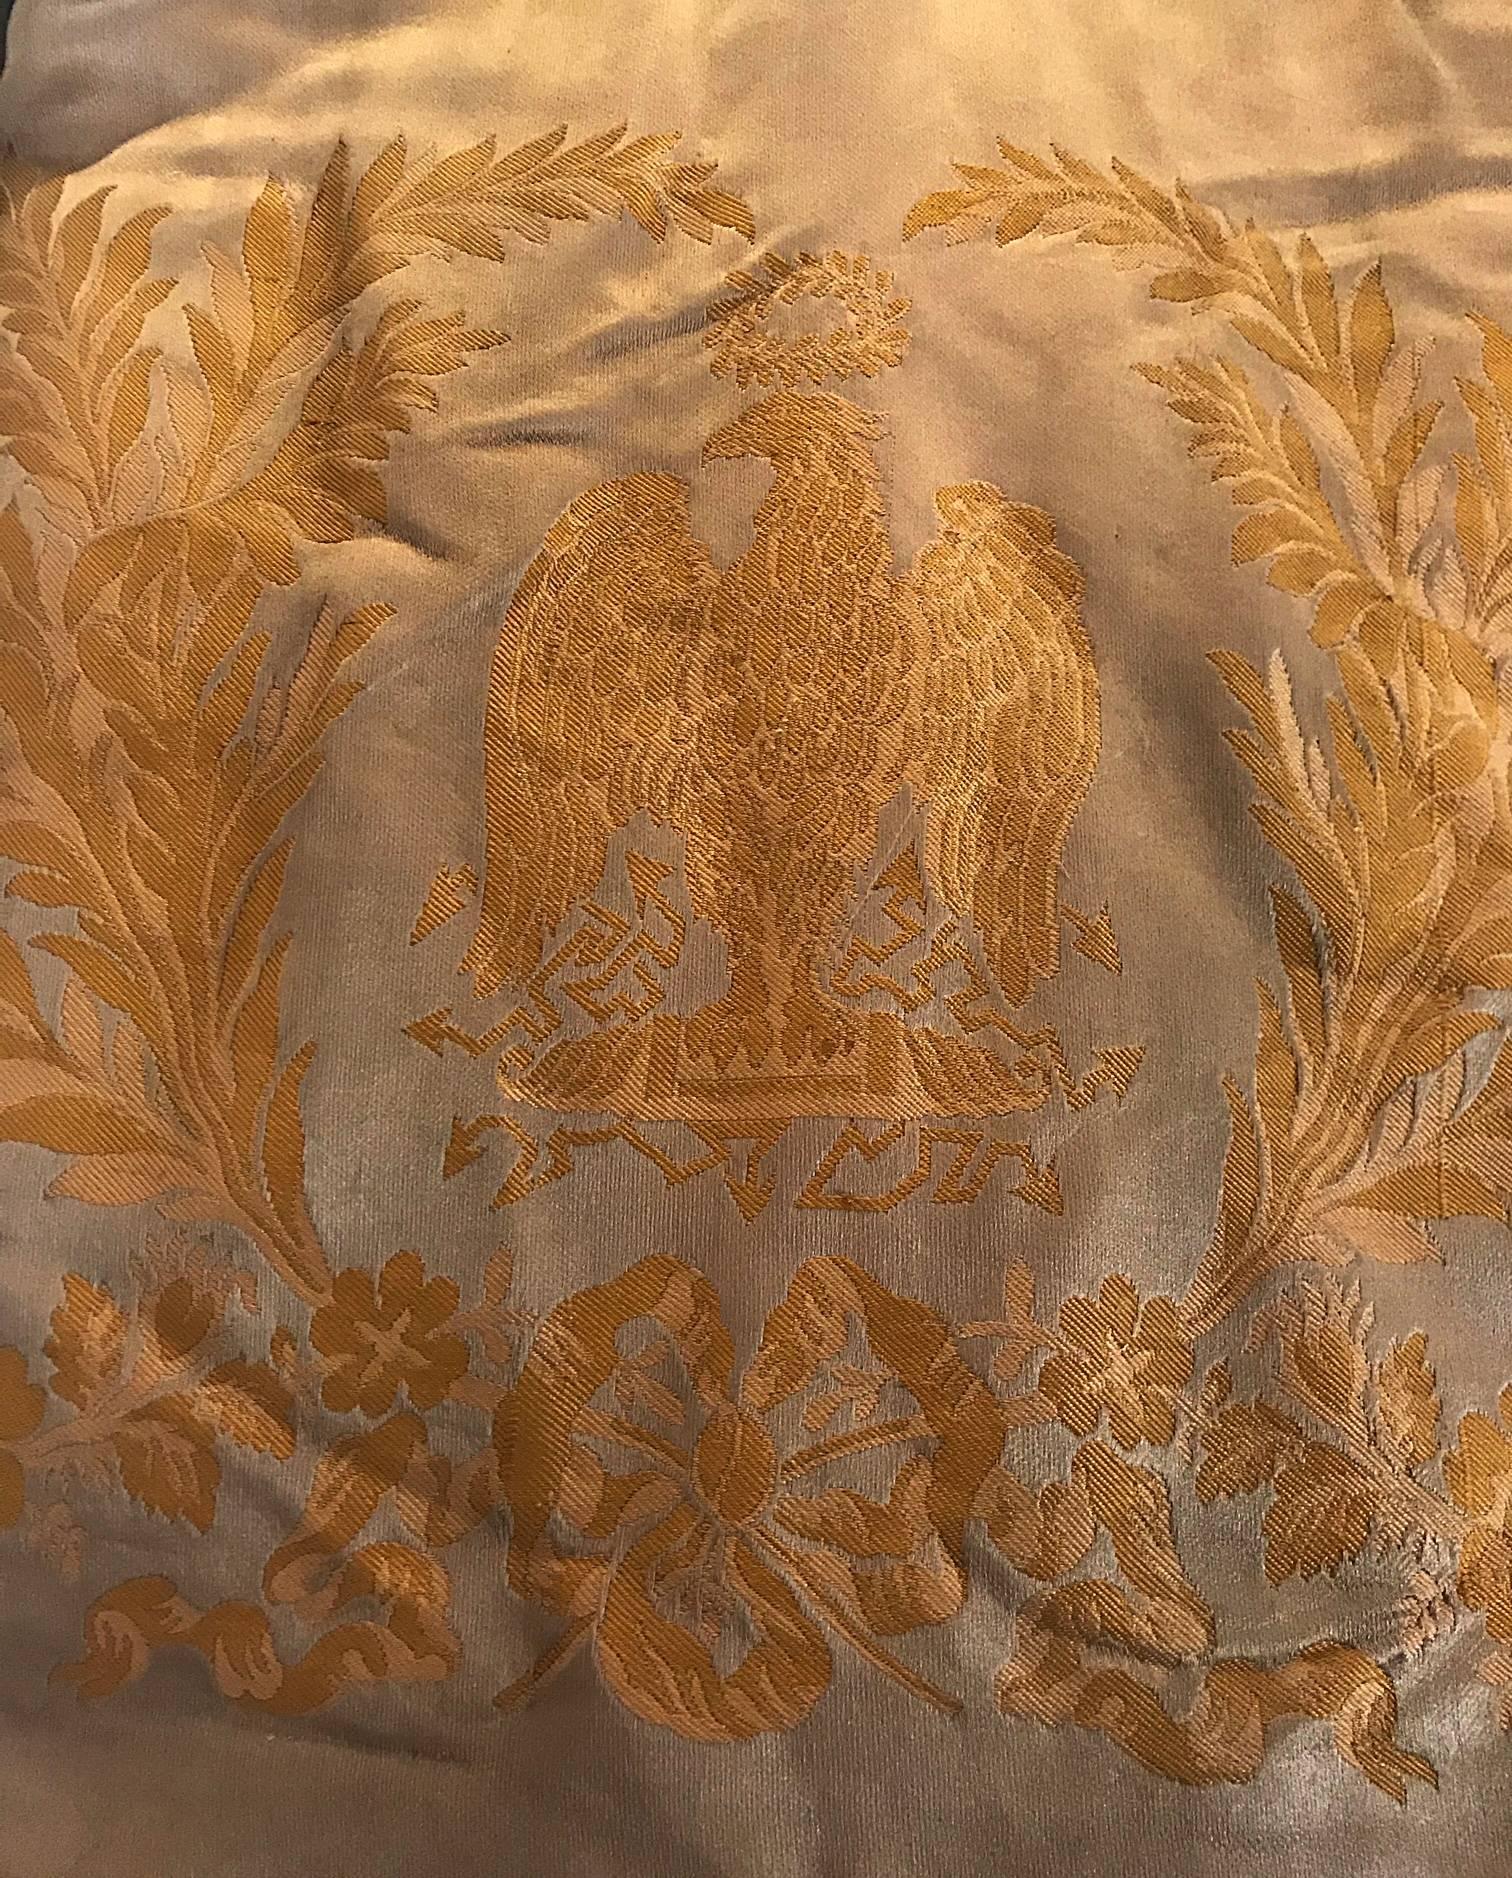 Napoleon Empire 1809 Historic Palais Beauharnais Curtains his personal Bed ! For Sale 1